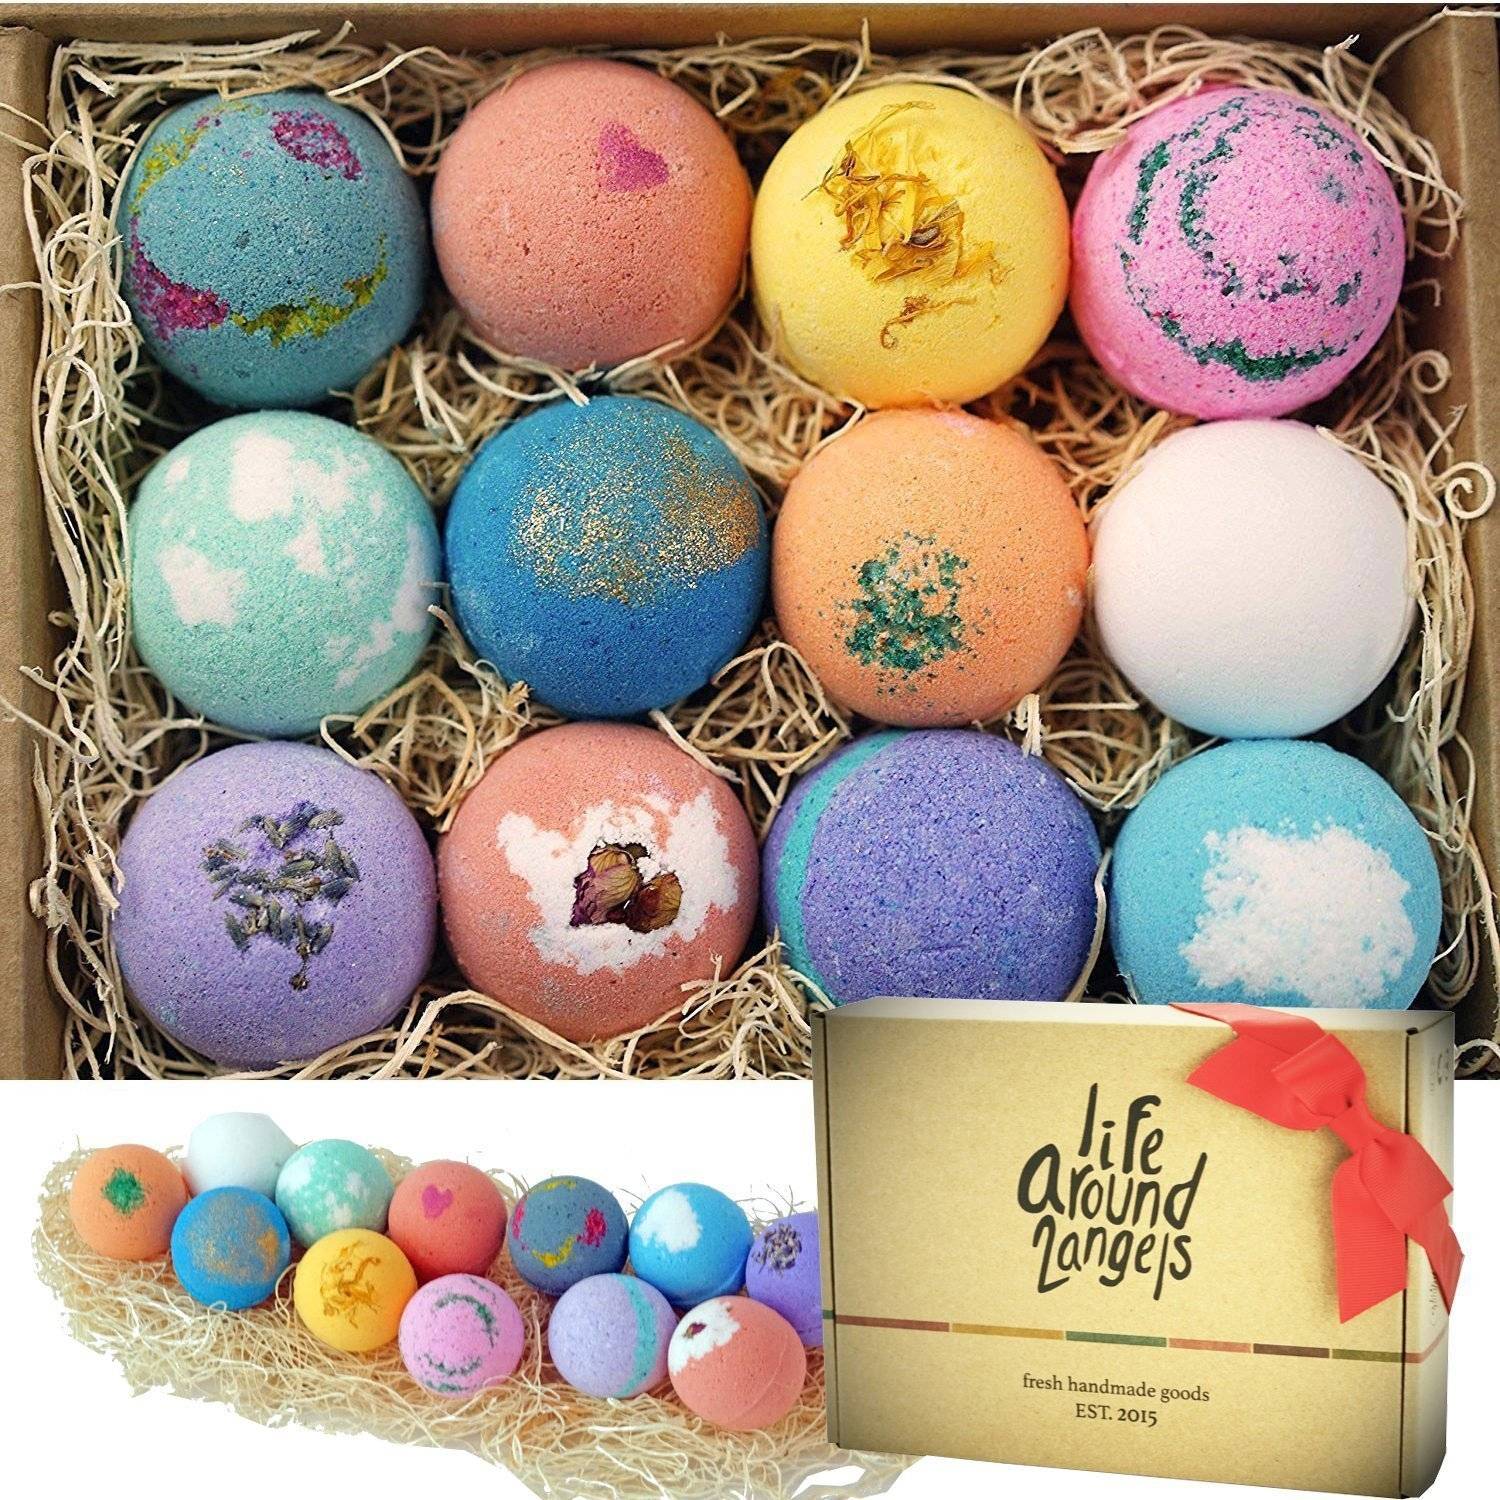 Bath Bombs Made Of Shea & Cocoa Butter Which Is Formulated for Normal or Dry Skin To Moisturize Skin and Perfect for Bubble & Spa Bath.